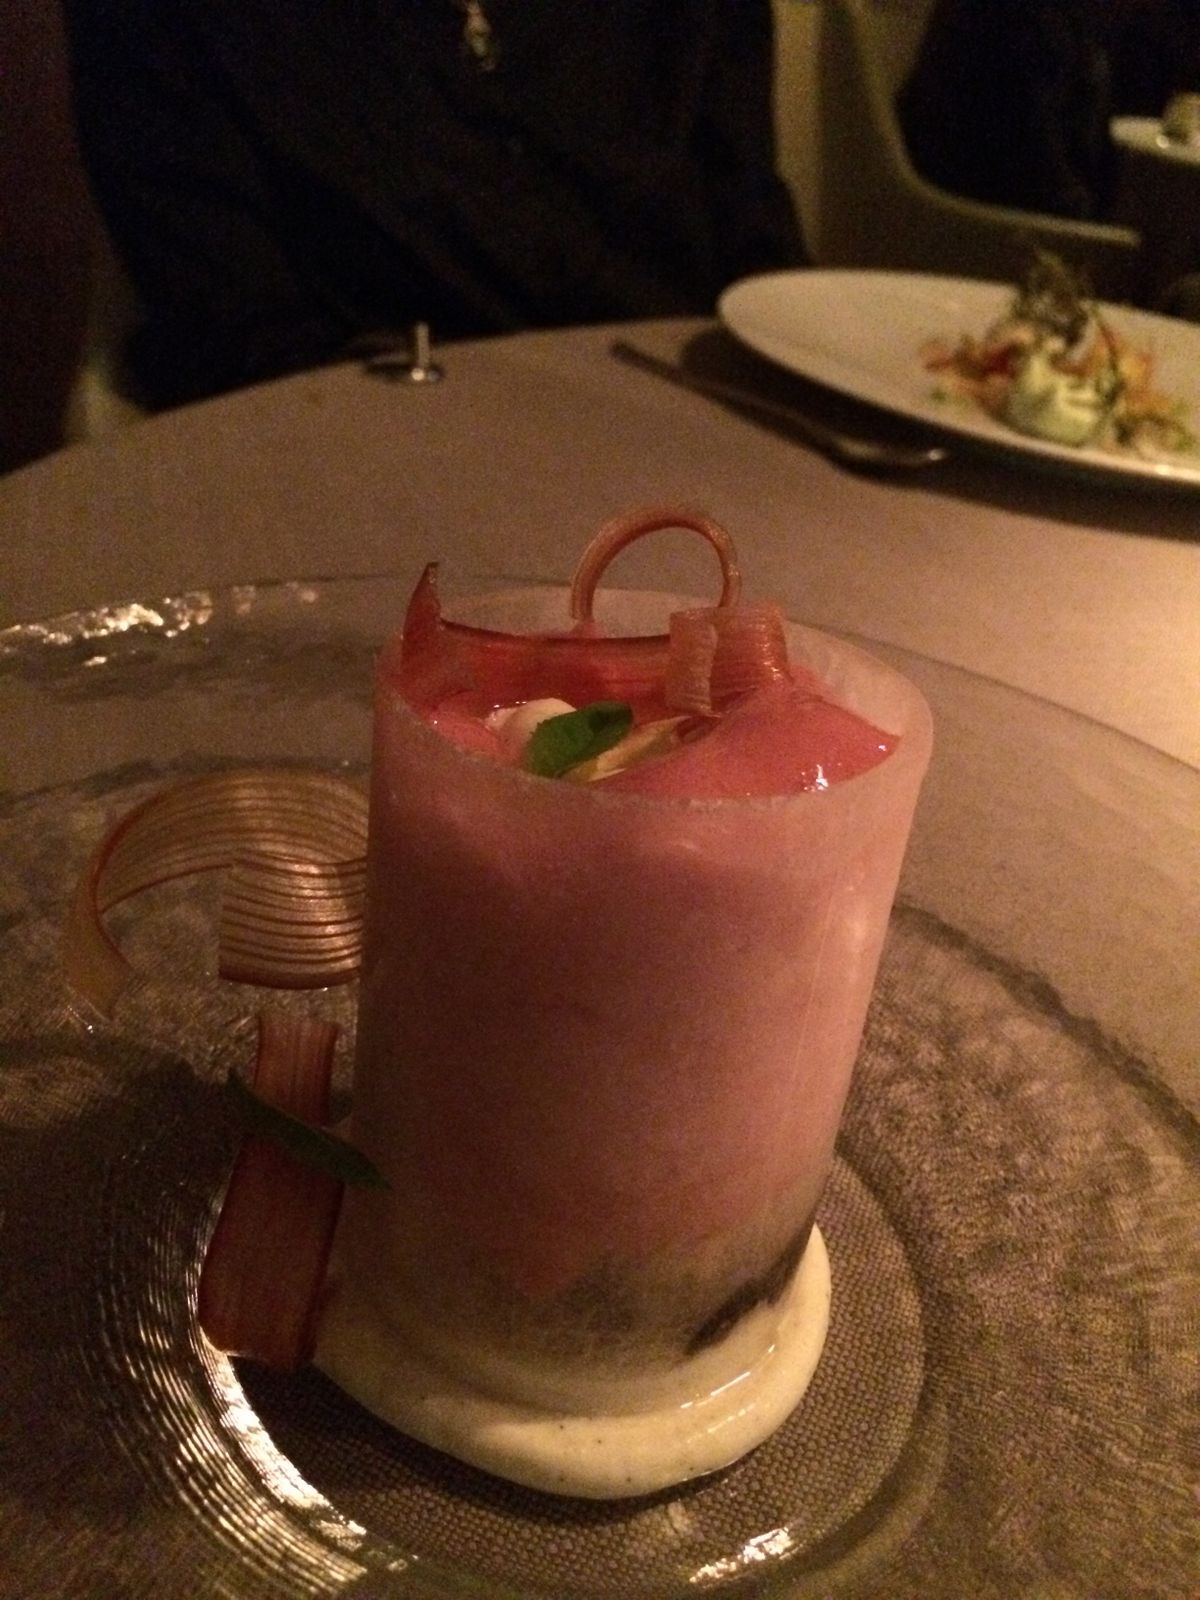 Keeper Collection - Rhubarb Dish at Grace Restaurant